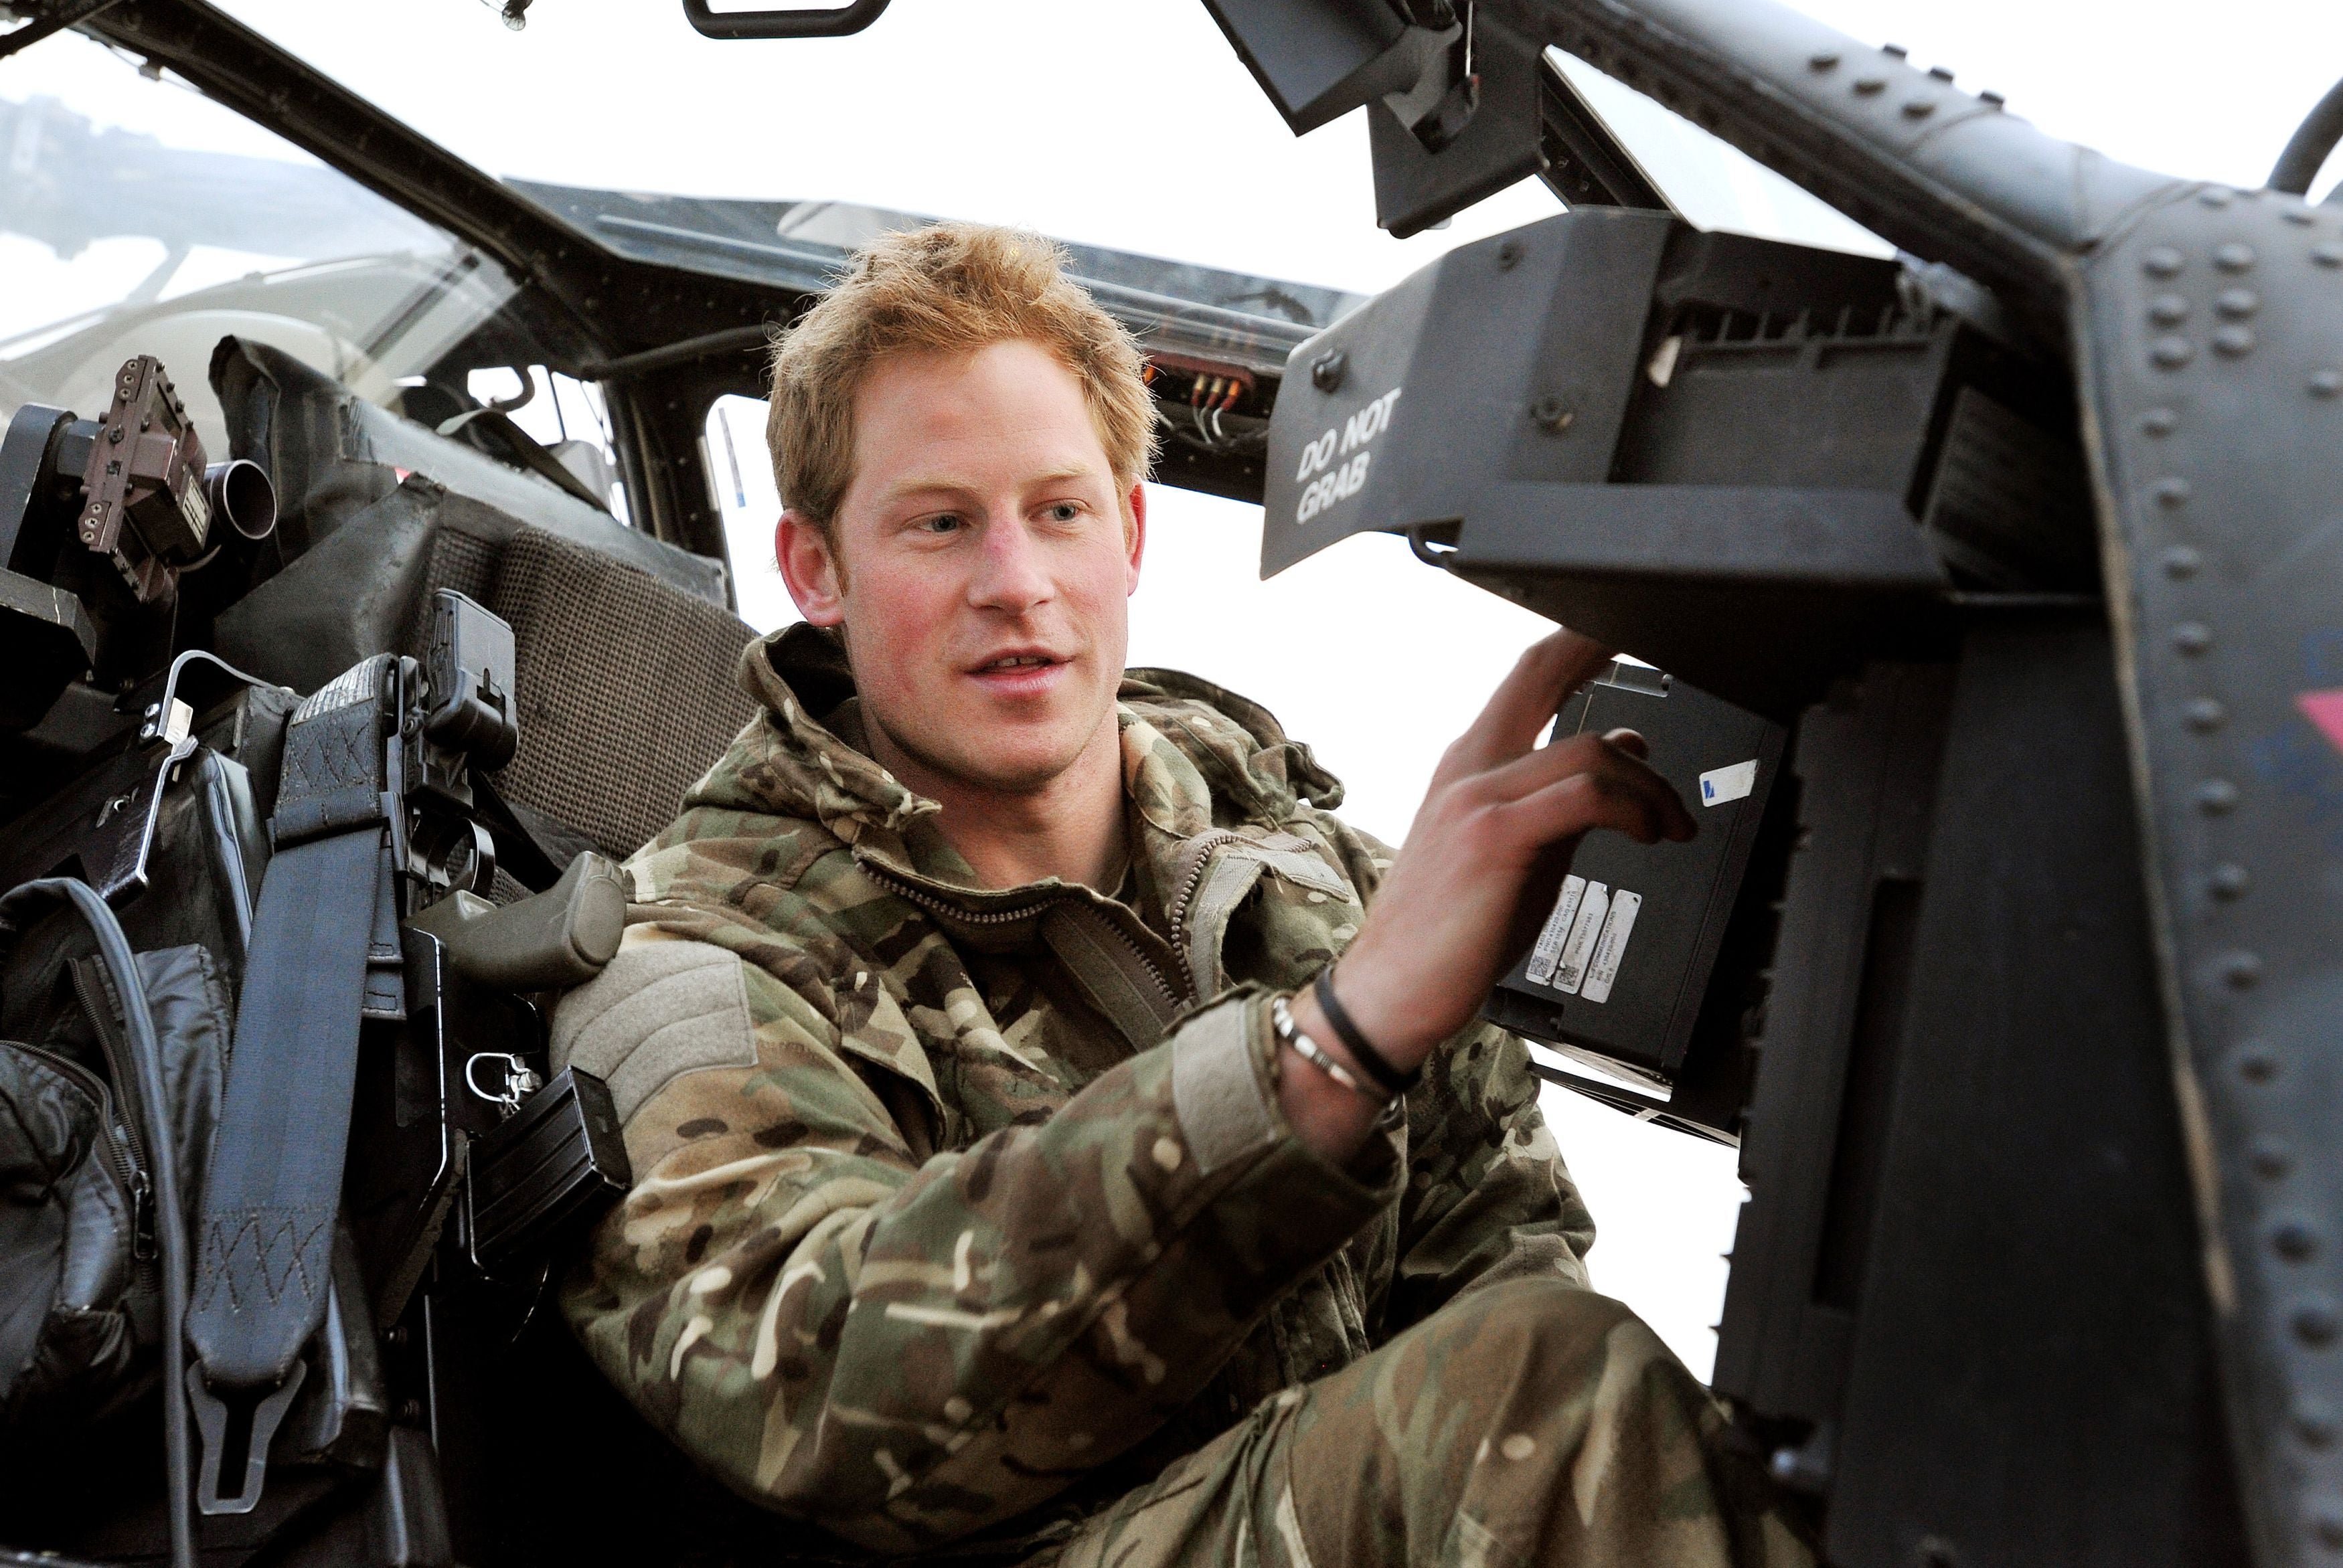 Prince Harry drew controversy when revealing he had killed 25 Taliban fighters this year